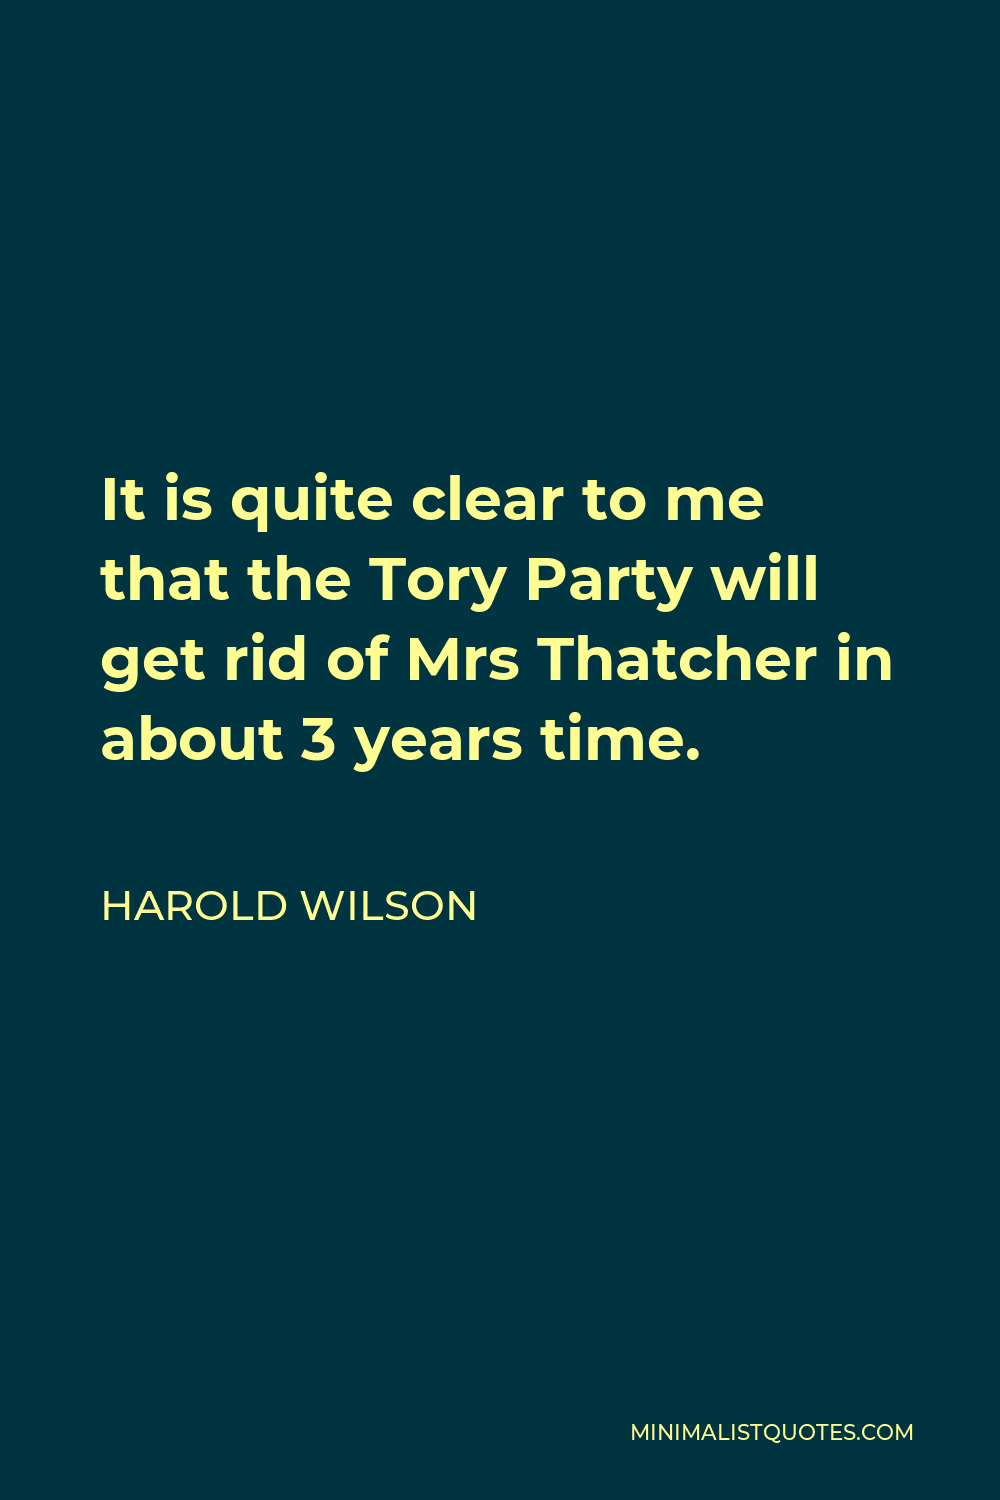 Harold Wilson Quote - It is quite clear to me that the Tory Party will get rid of Mrs Thatcher in about 3 years time.